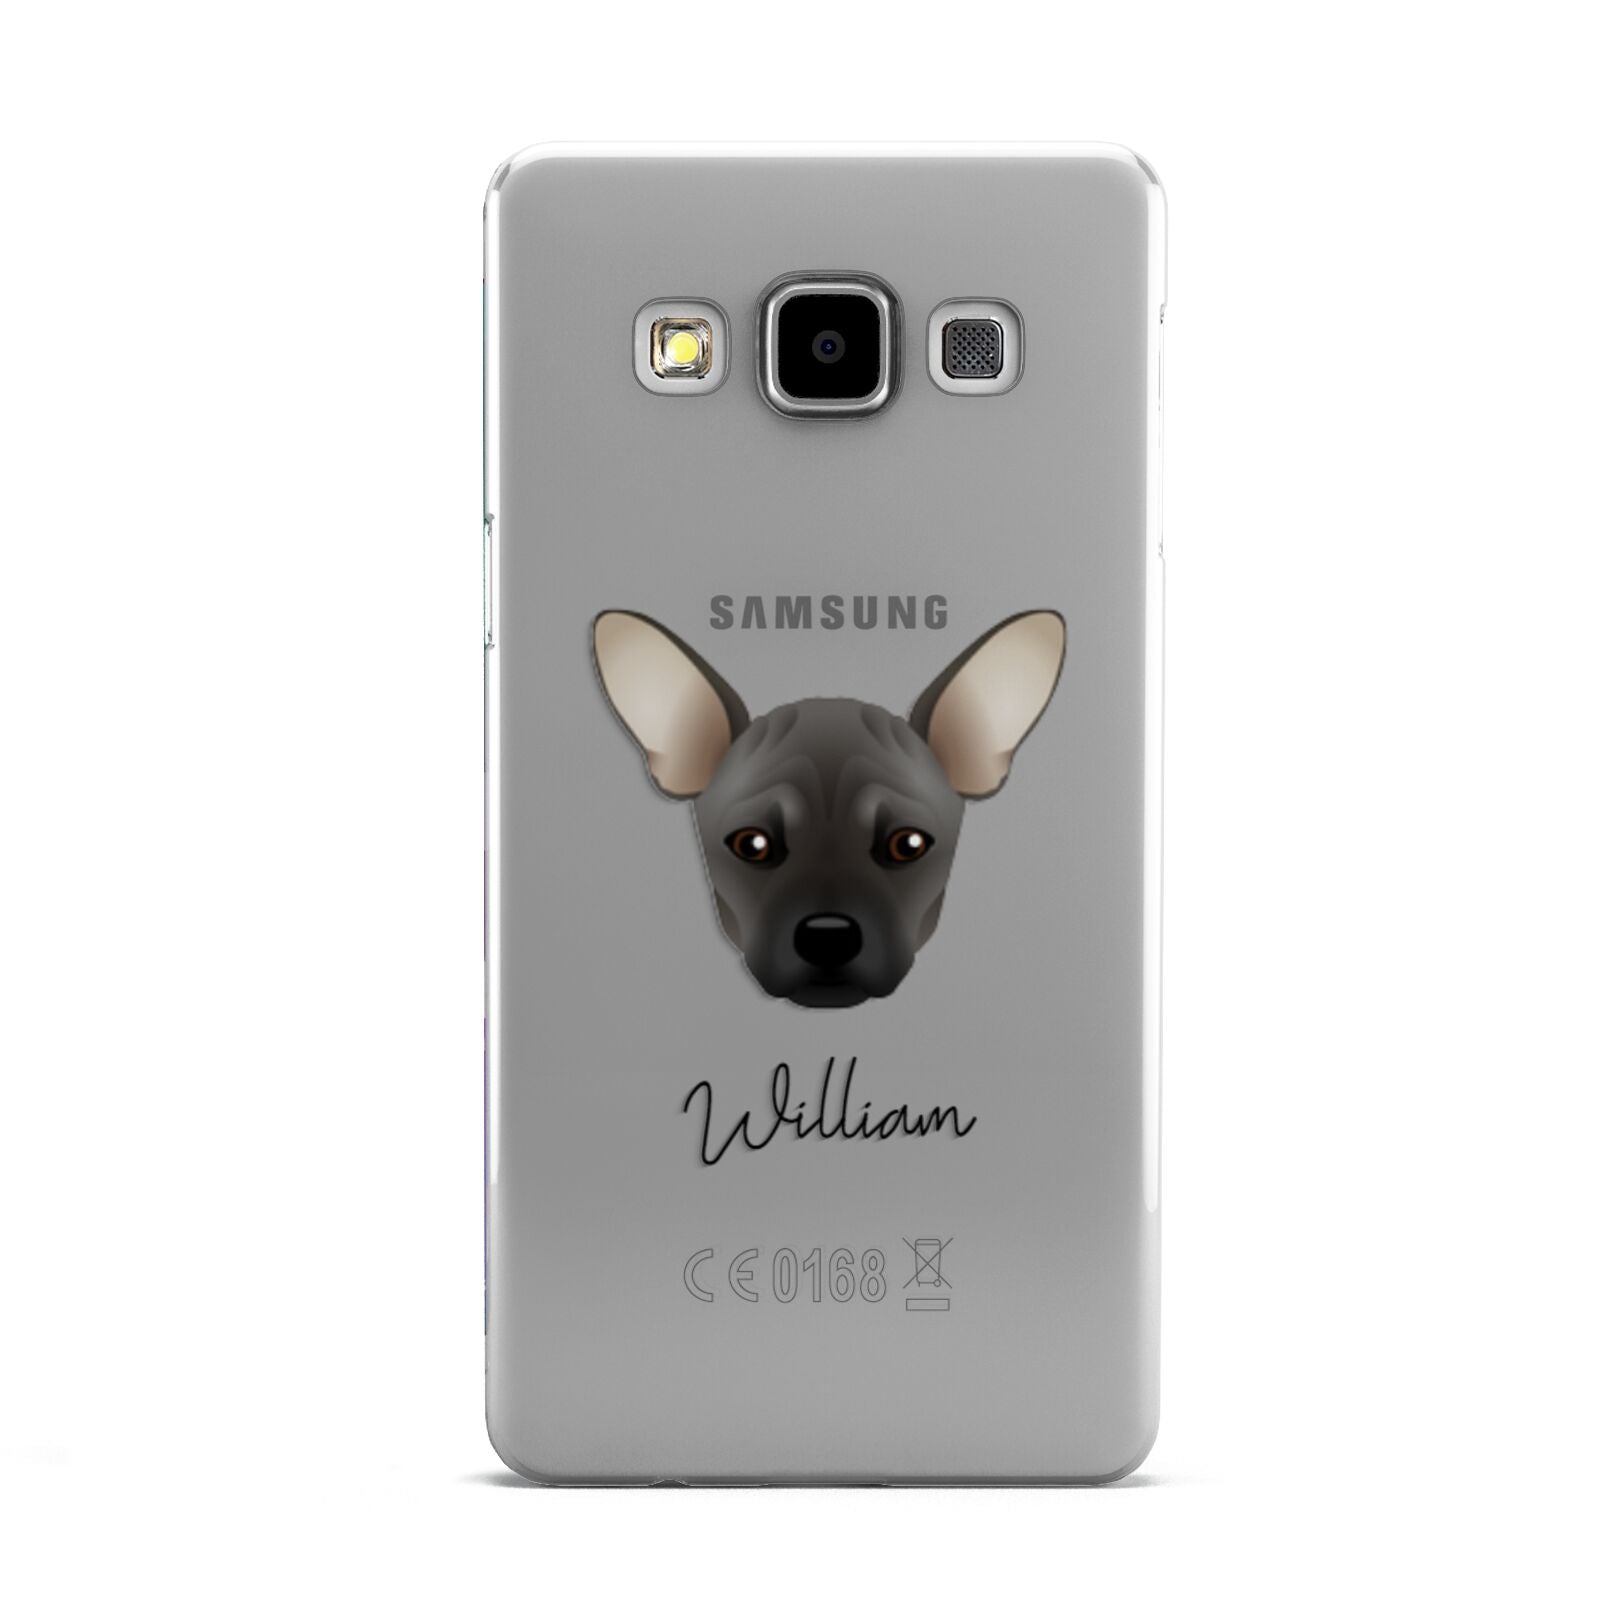 French Pin Personalised Samsung Galaxy A5 Case